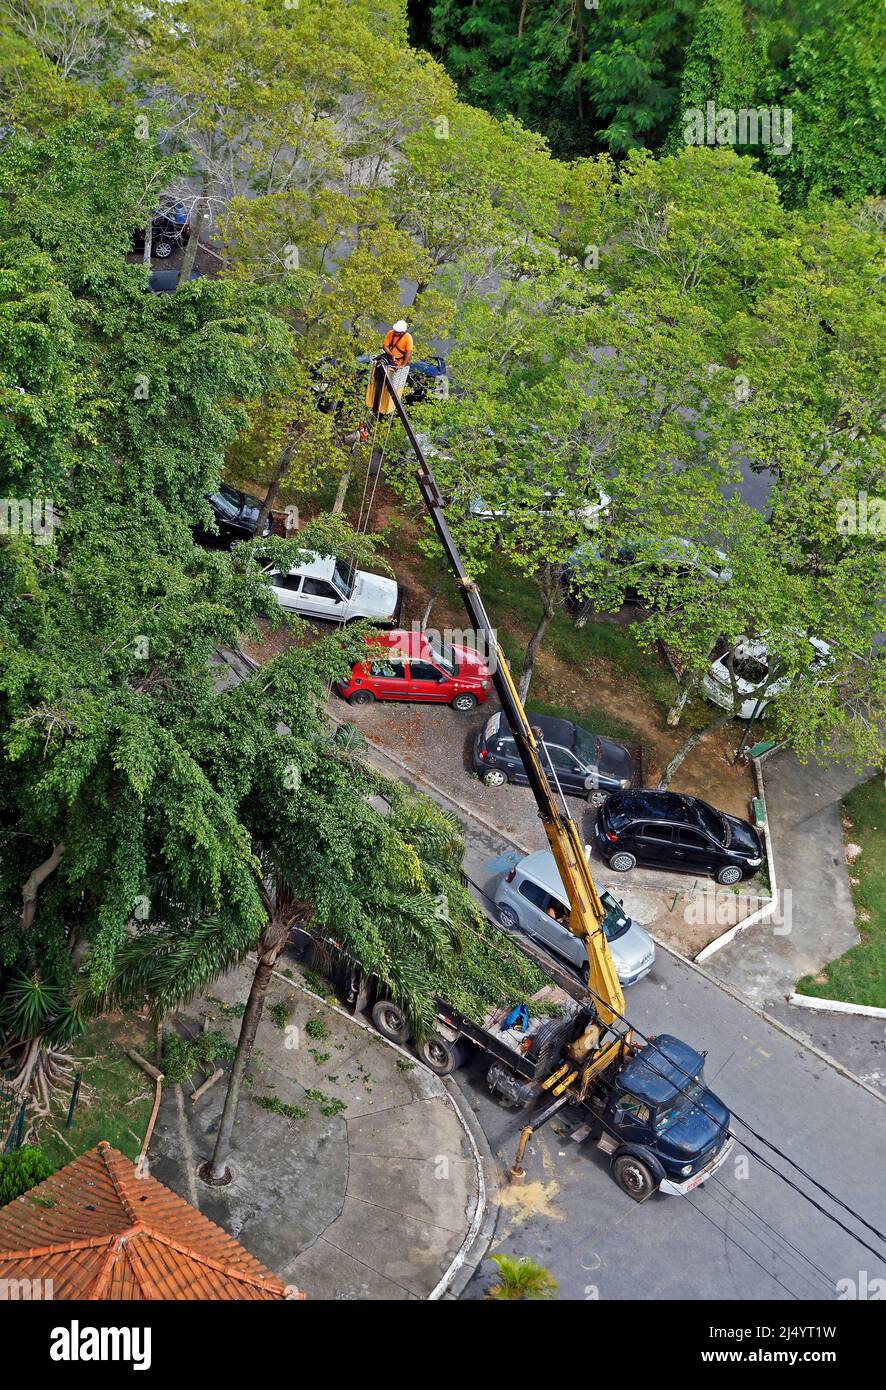 RIO DE JANEIRO, BRAZIL - FEBRUARY 22, 2021: Service worker pruning tree branches on a platform of a crane truck Stock Photo